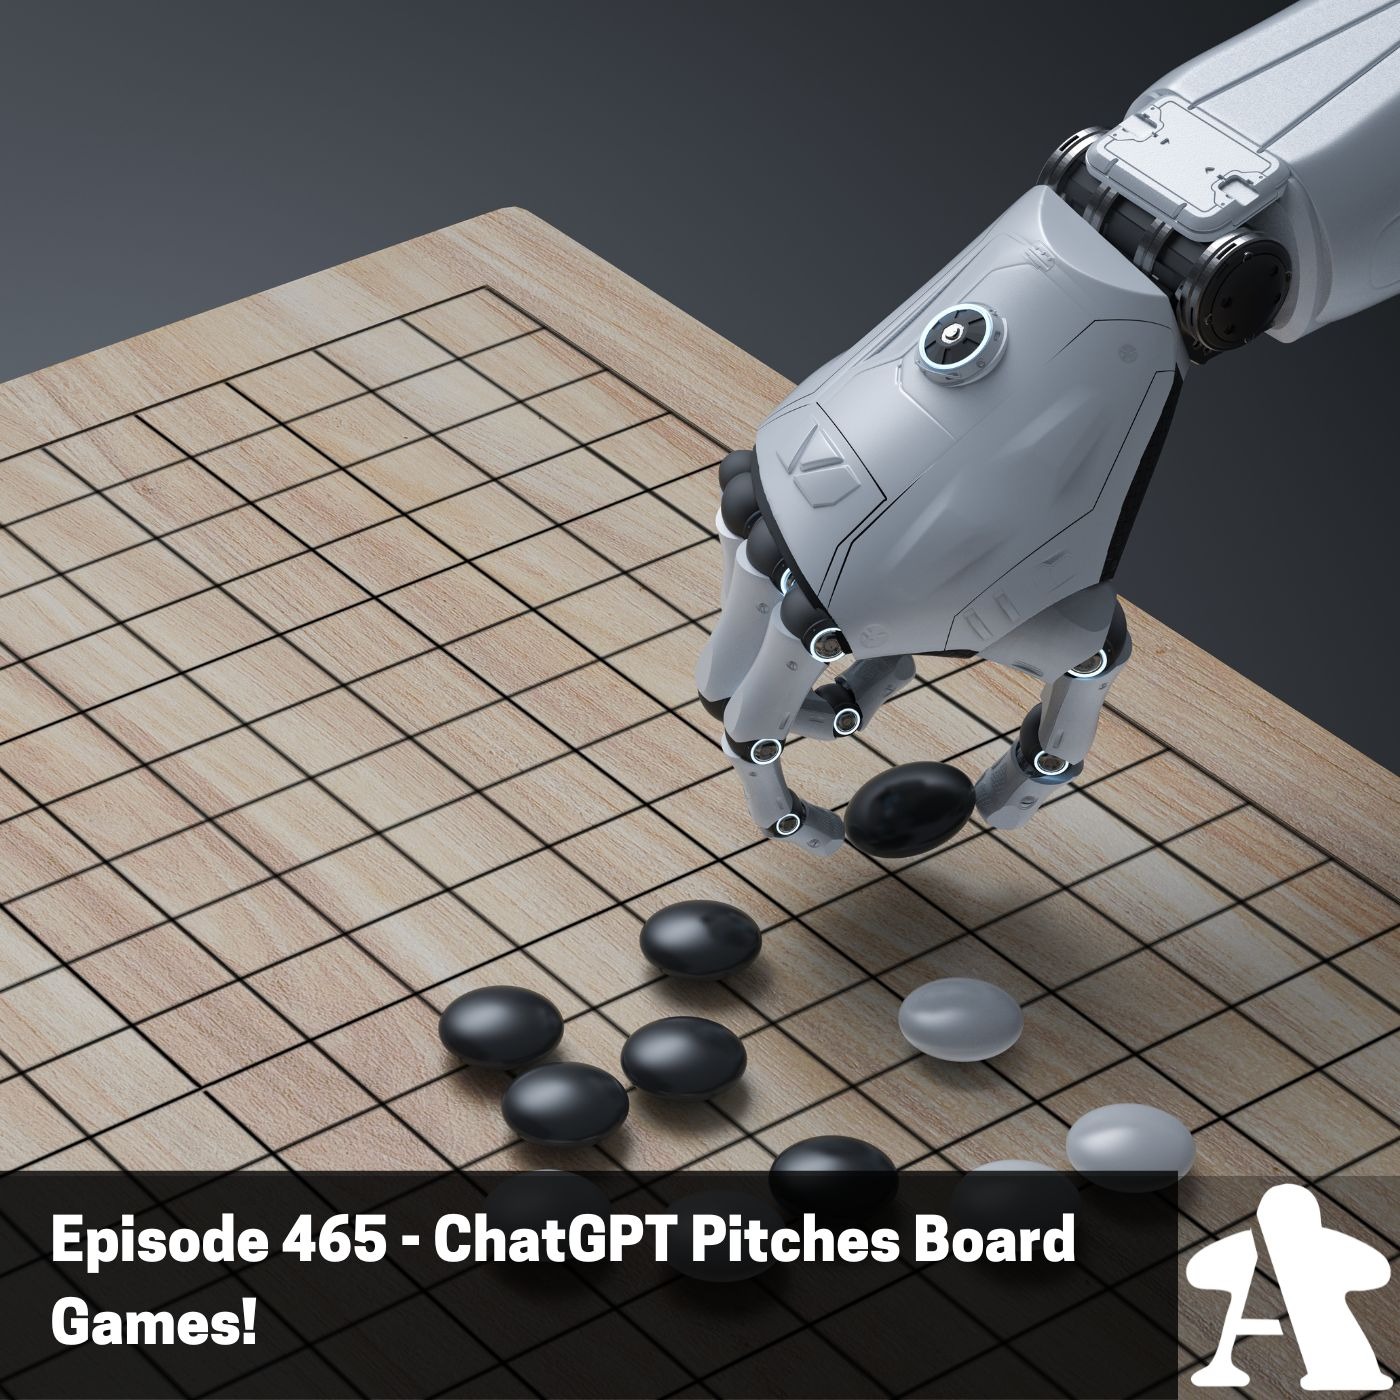 Episode 466 - ChatGPT Pitches Board Games!